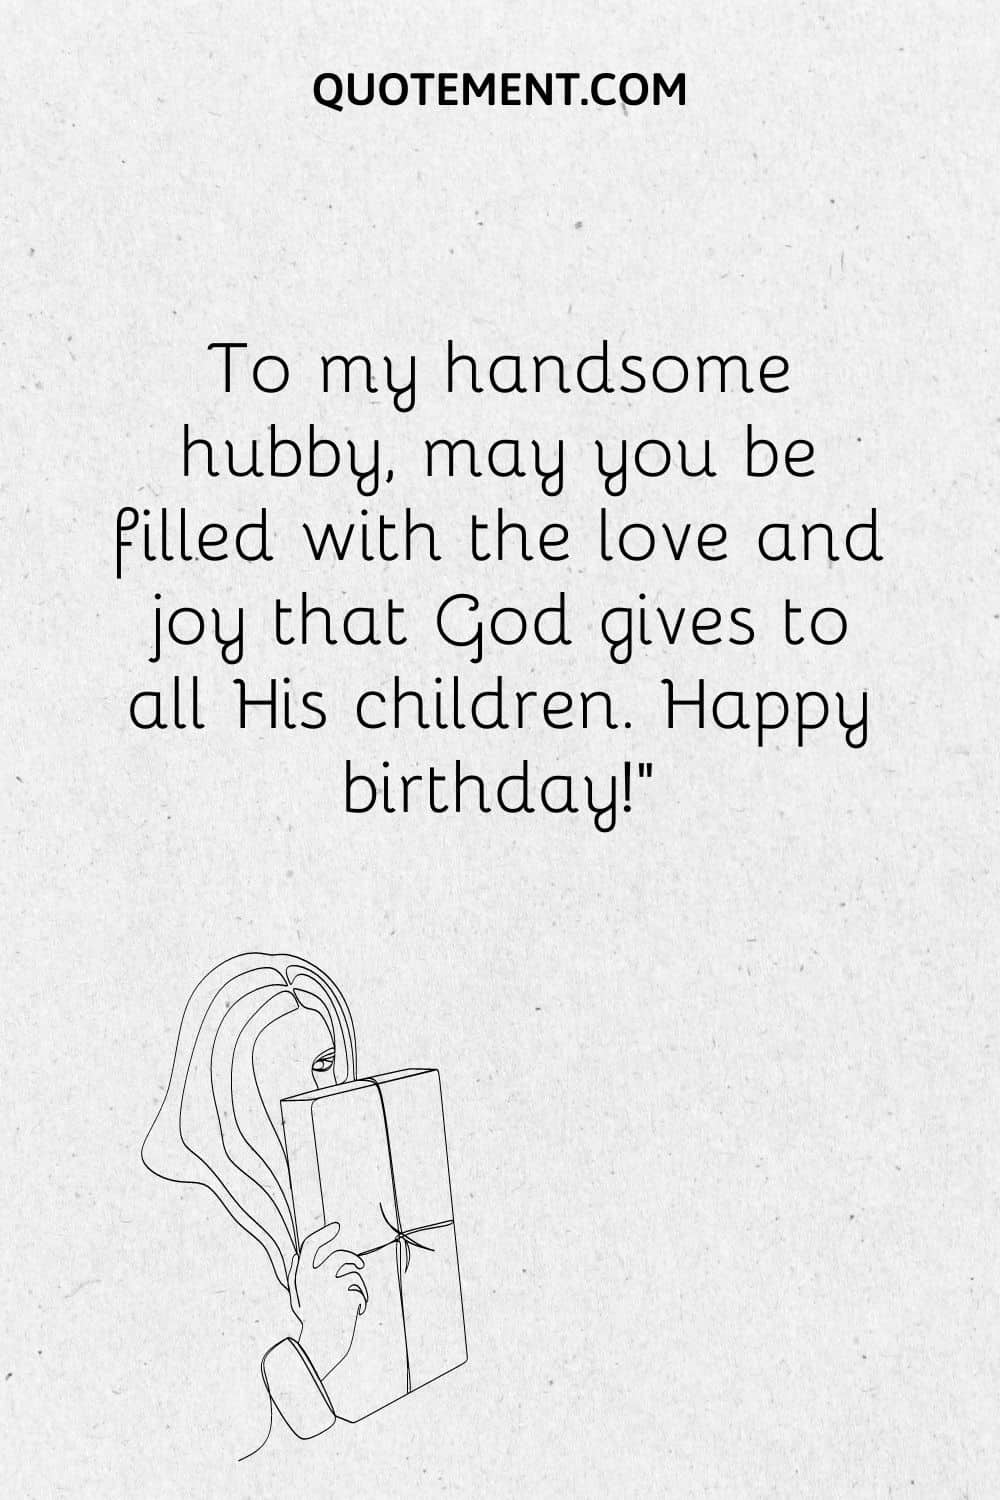 To my handsome hubby, may you be filled with the love and joy that God gives to all His children. Happy birthday!